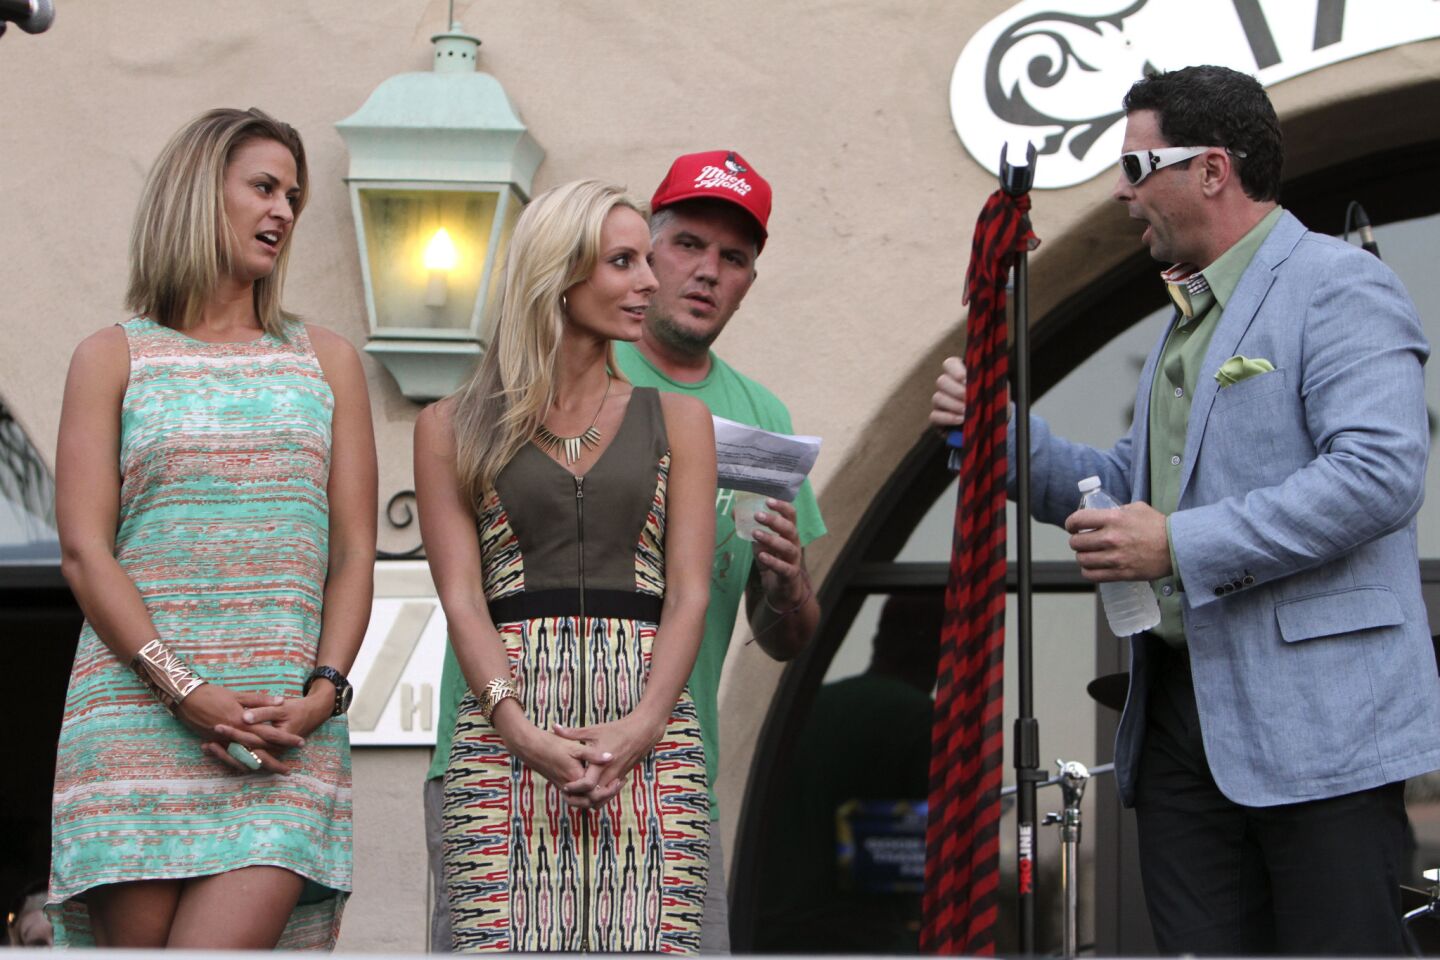 U-T TV personalities Michelle Guerin, Amber Mesker, Chris Cantore and Scott Kaplan during Party in the Paddock on final day of racing for the 2013 horse racing season at Del Mar.